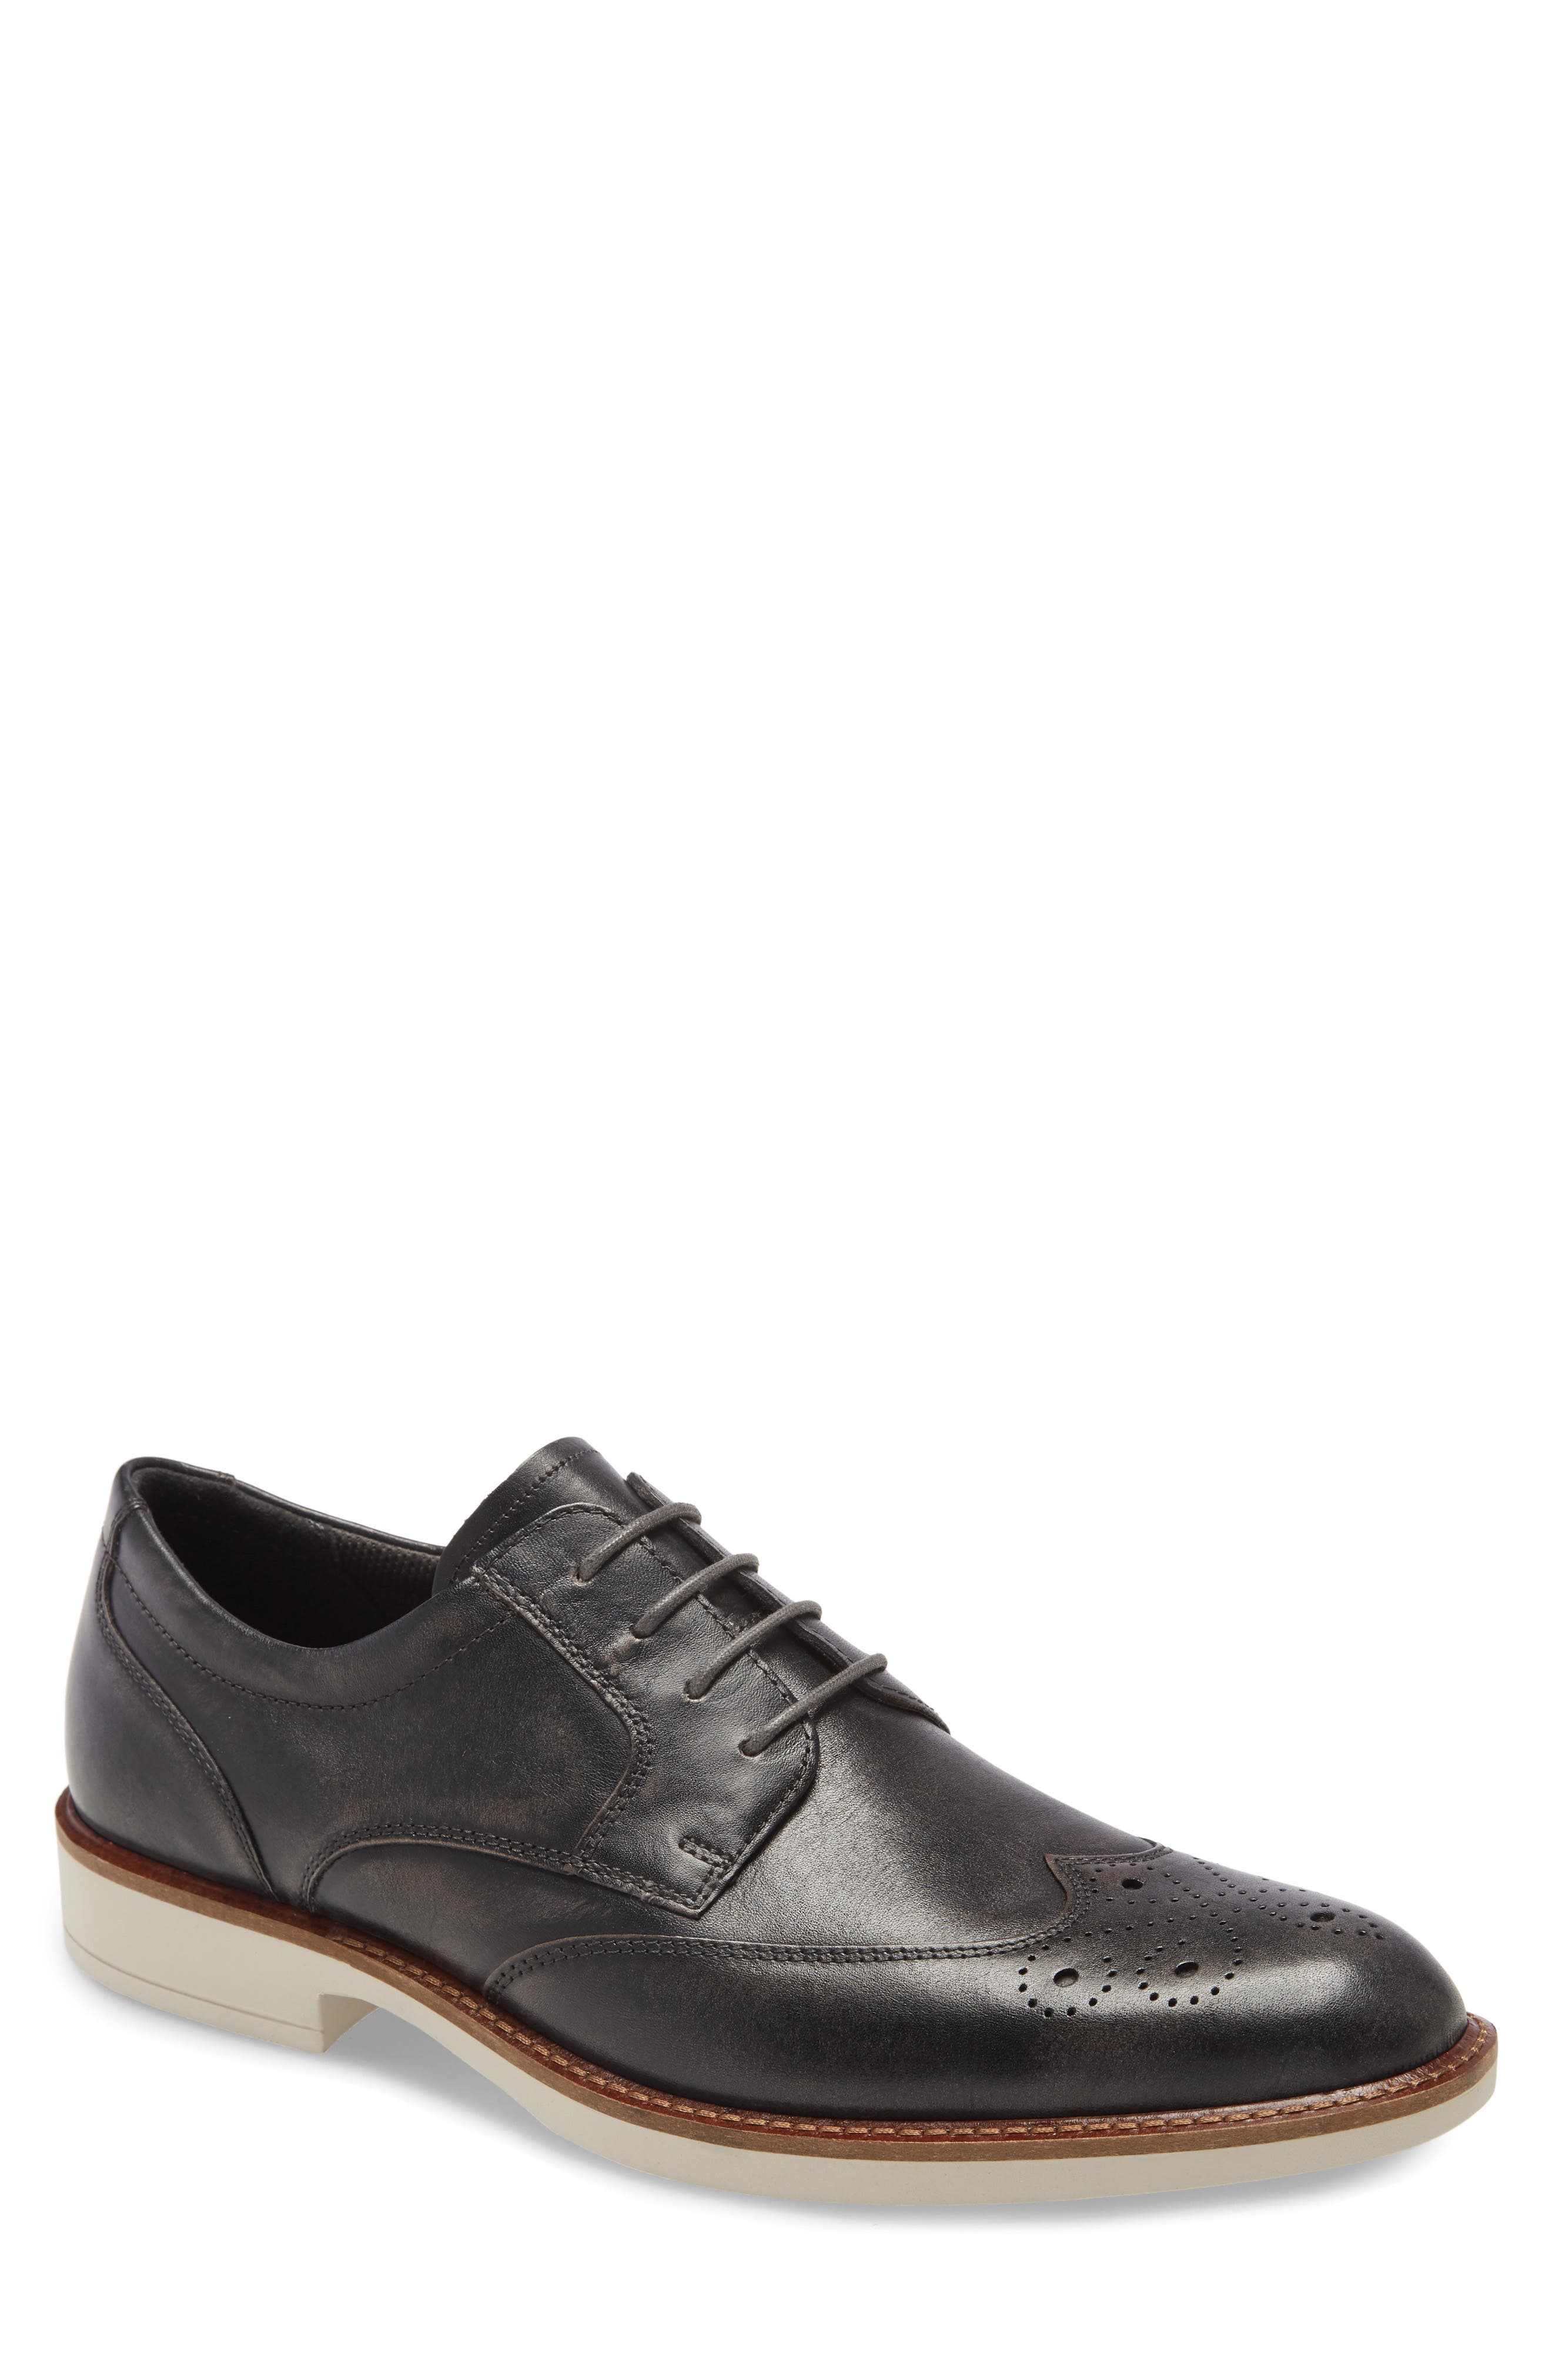 UPC 825840492507 product image for ECCO Biarritz Wingtip, Size 8-8.5Us in Magnet at Nordstrom | upcitemdb.com